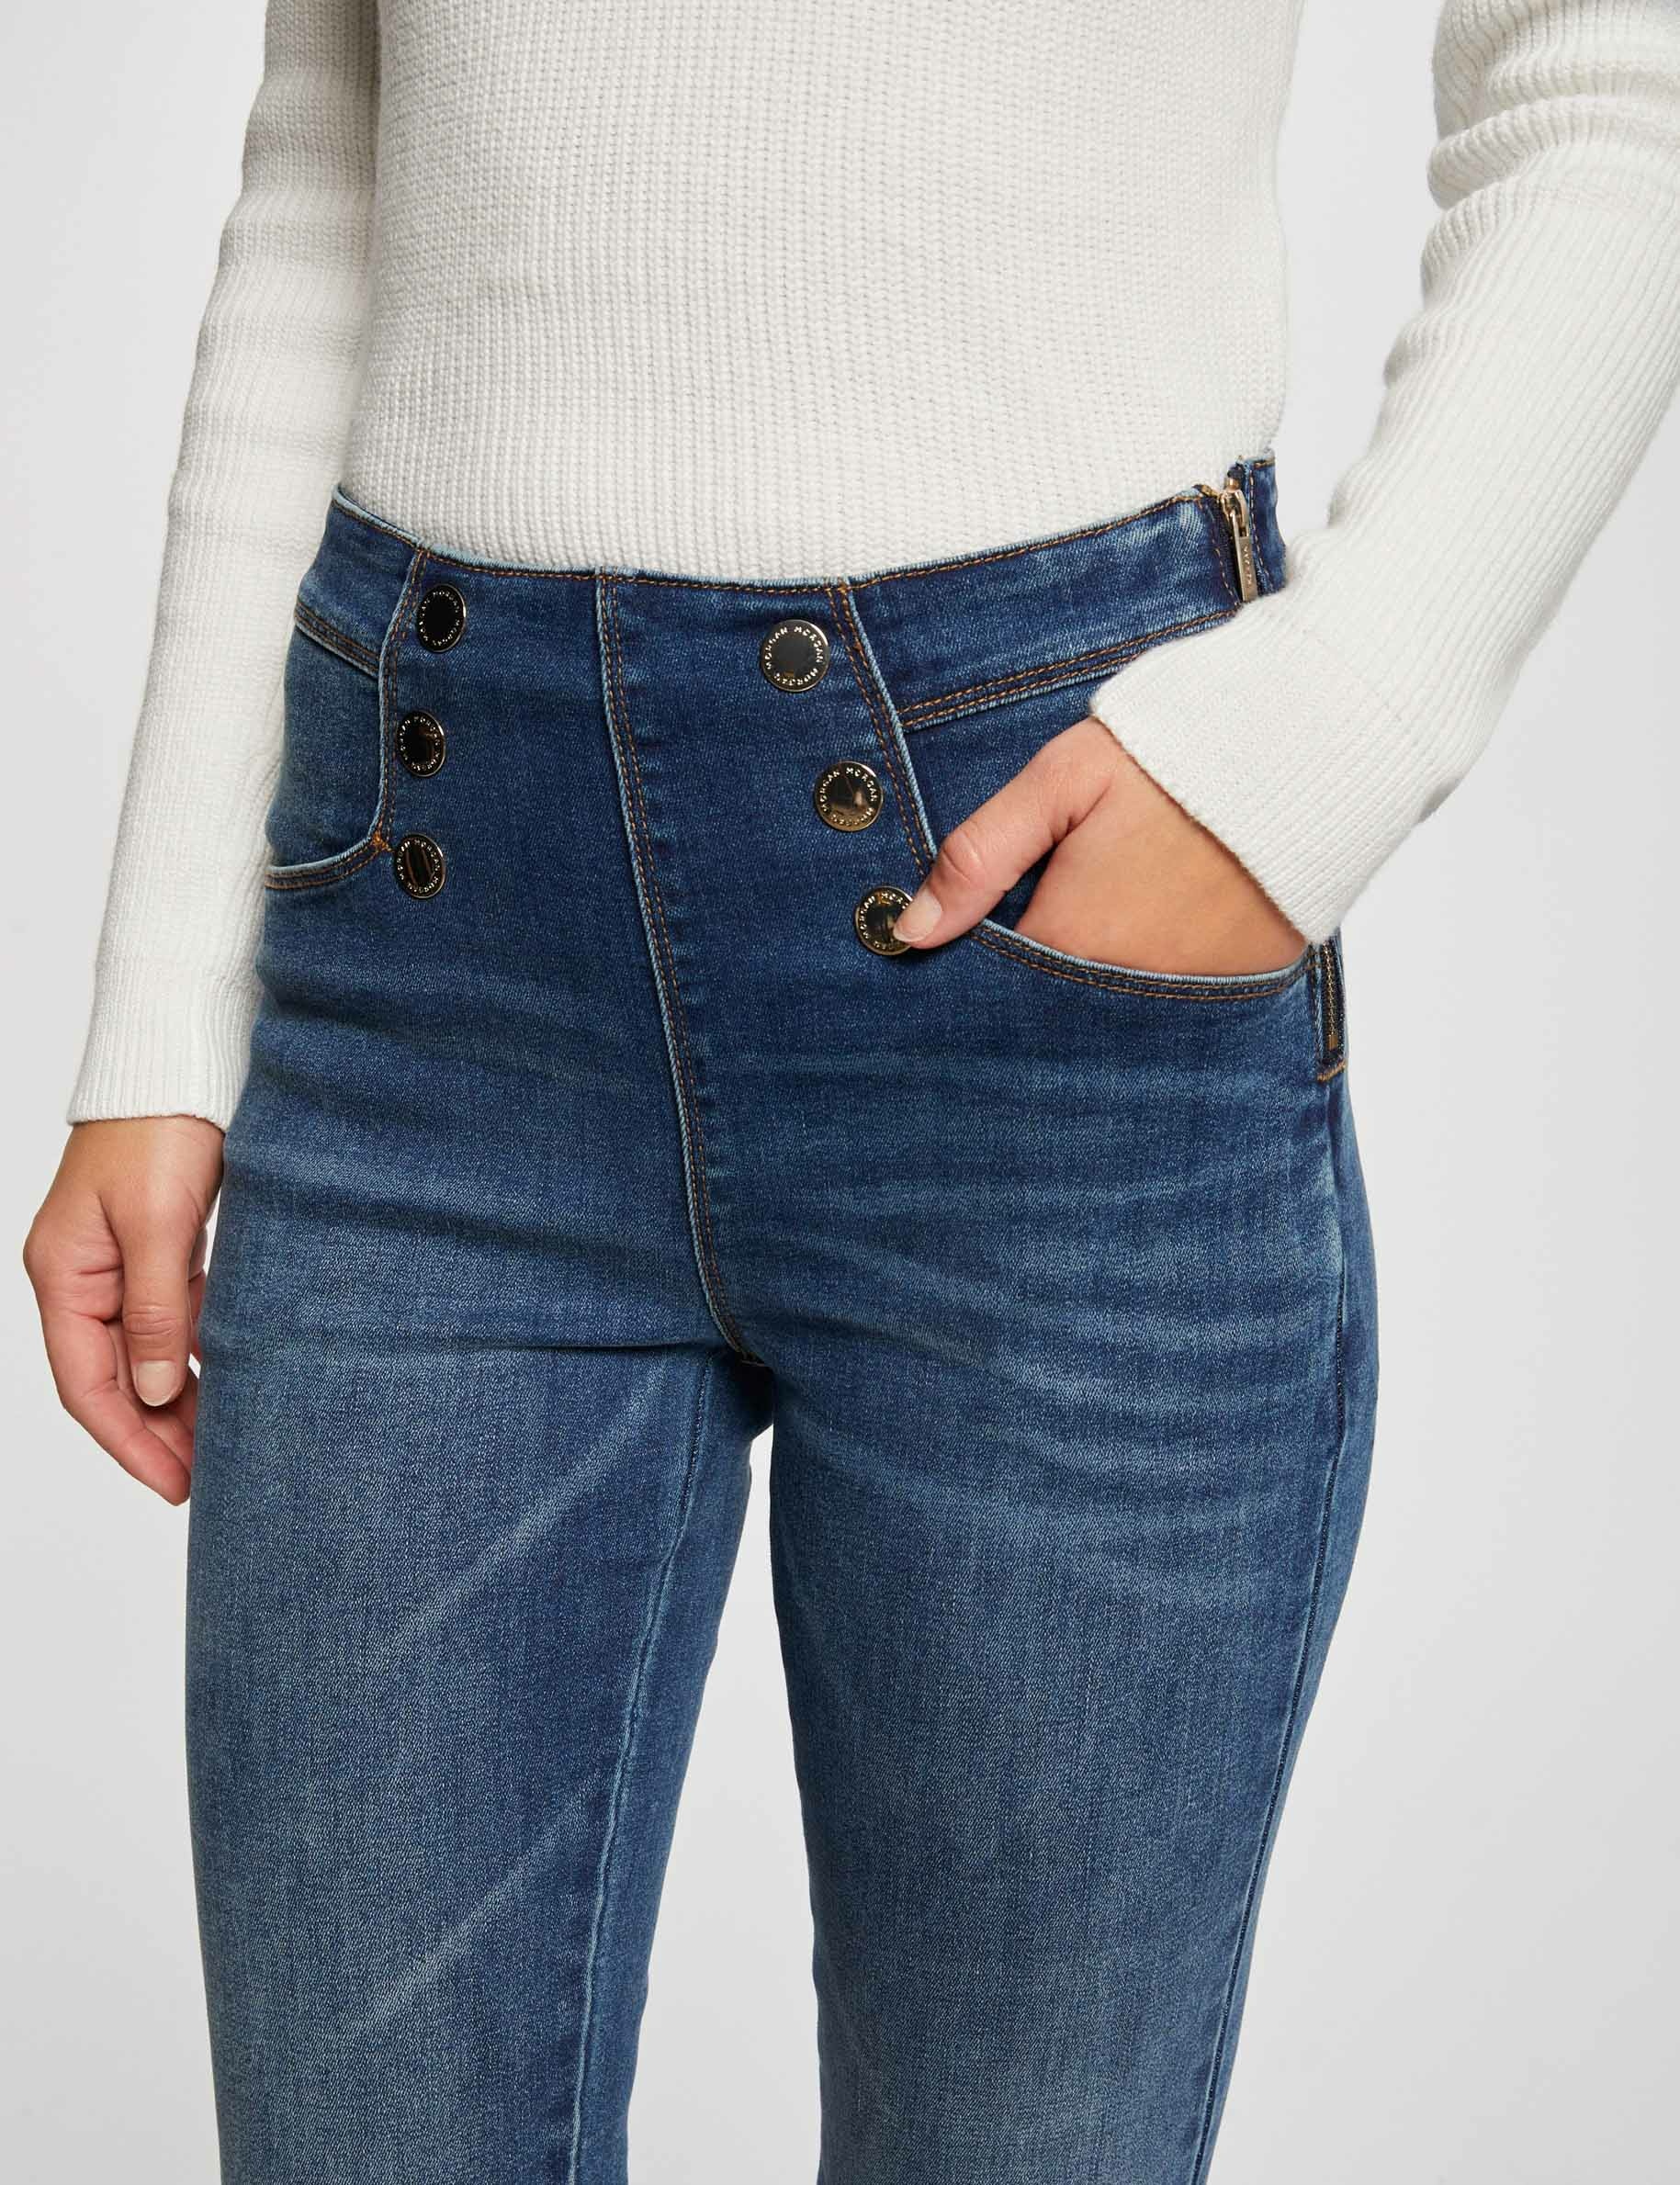 Skinny cropped jeans with buttons stone denim ladies'